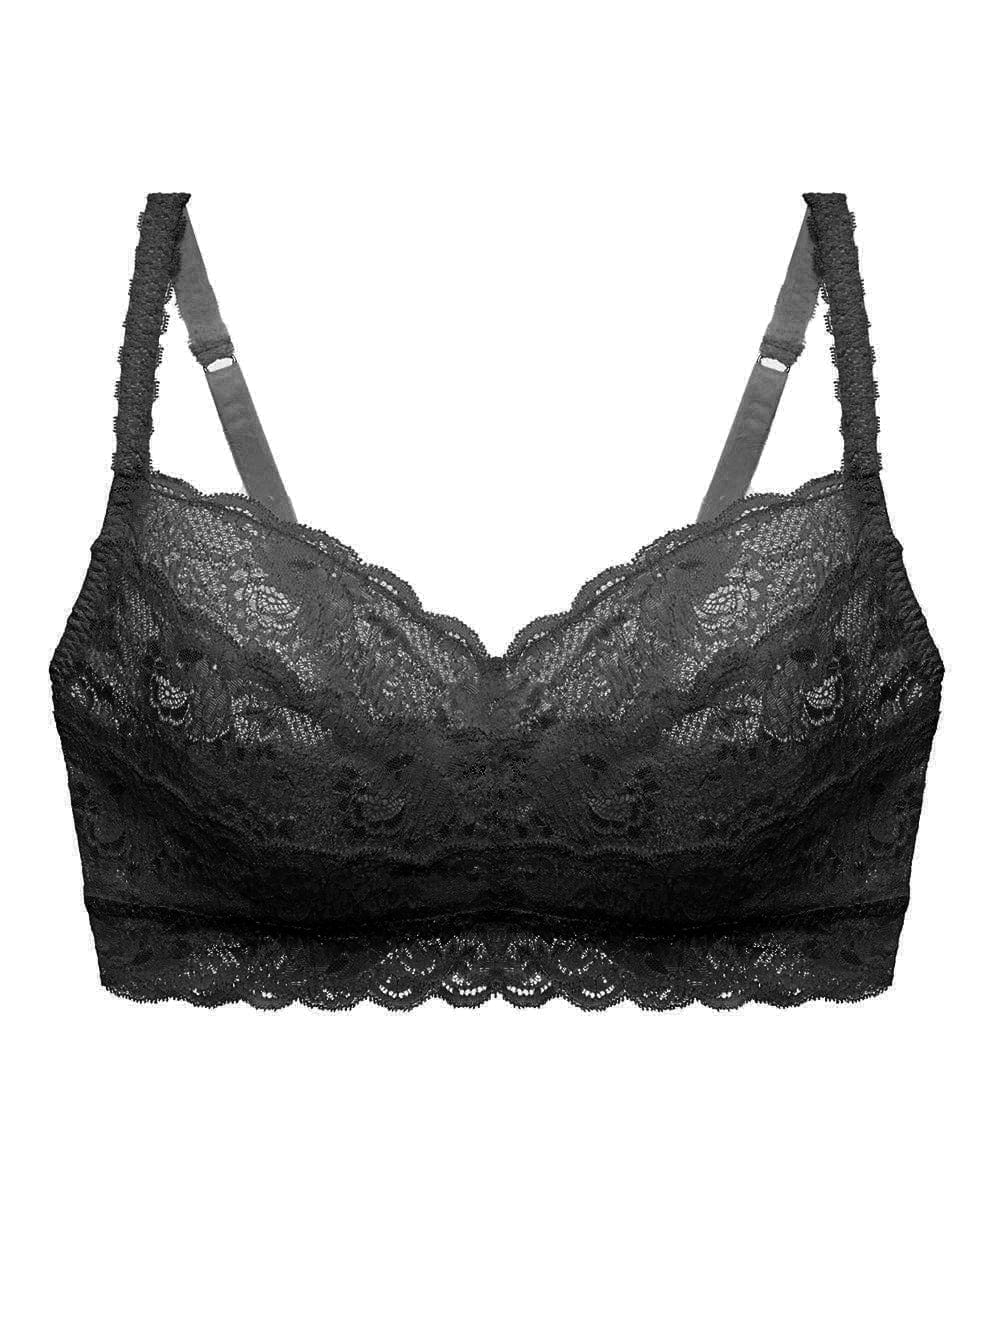 Dorothee Lace Padded Triangle Bralette